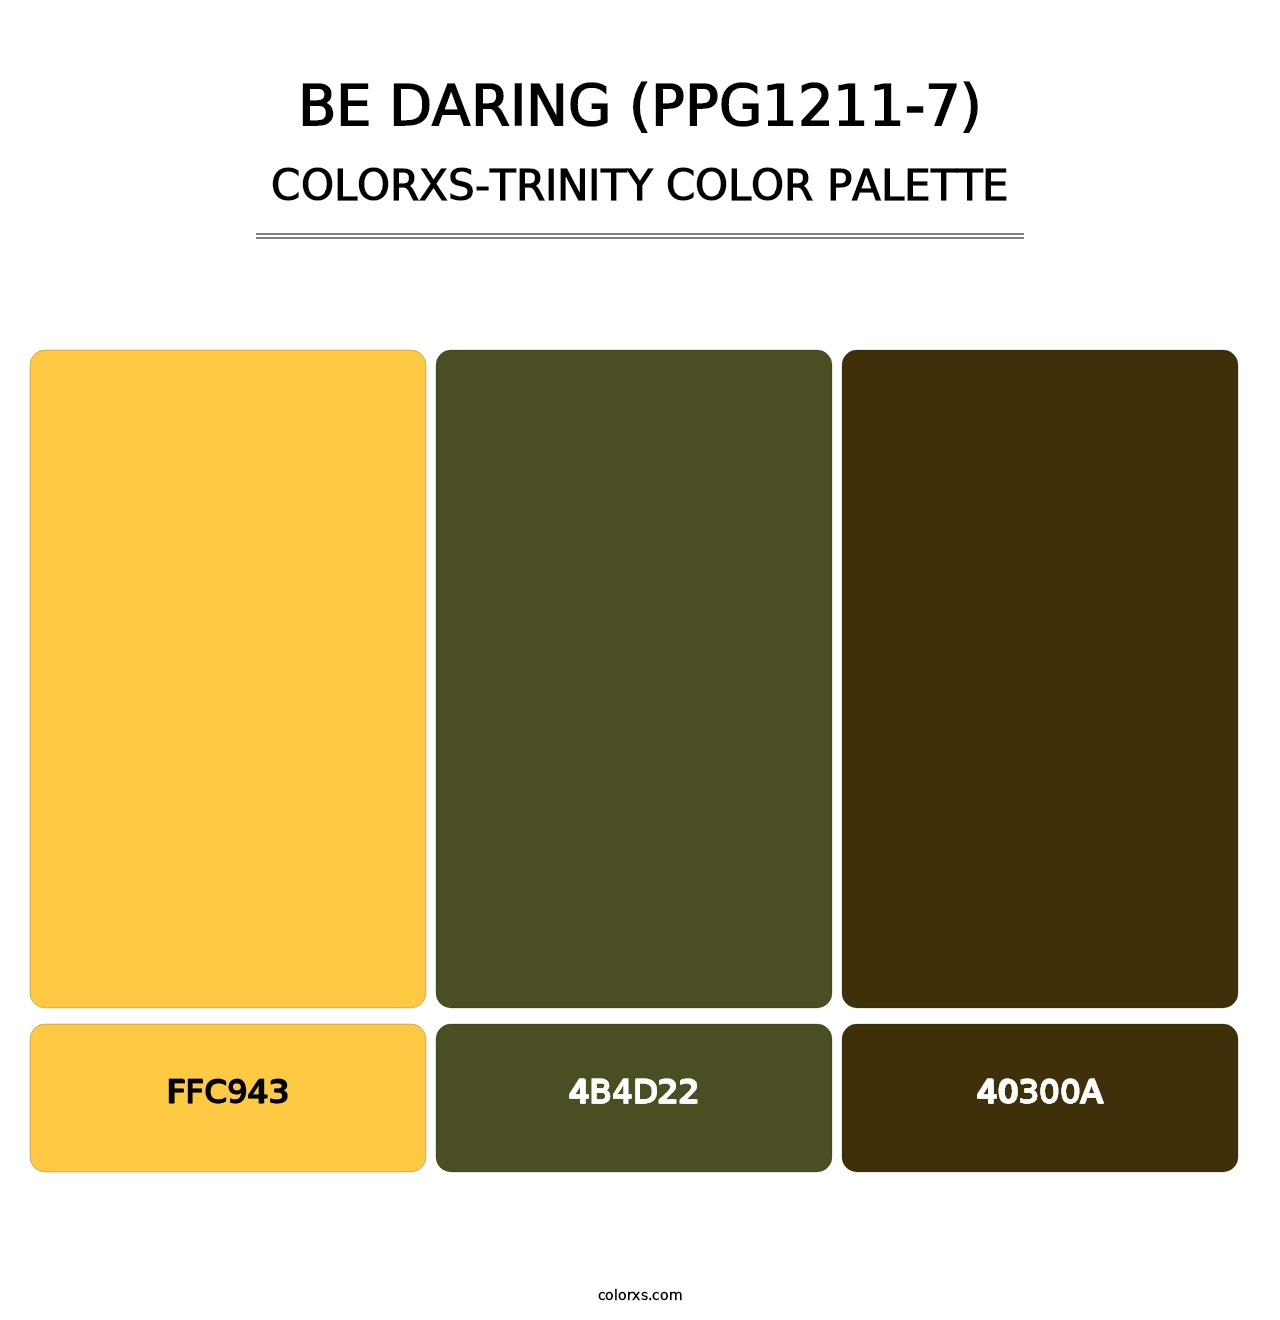 Be Daring (PPG1211-7) - Colorxs Trinity Palette